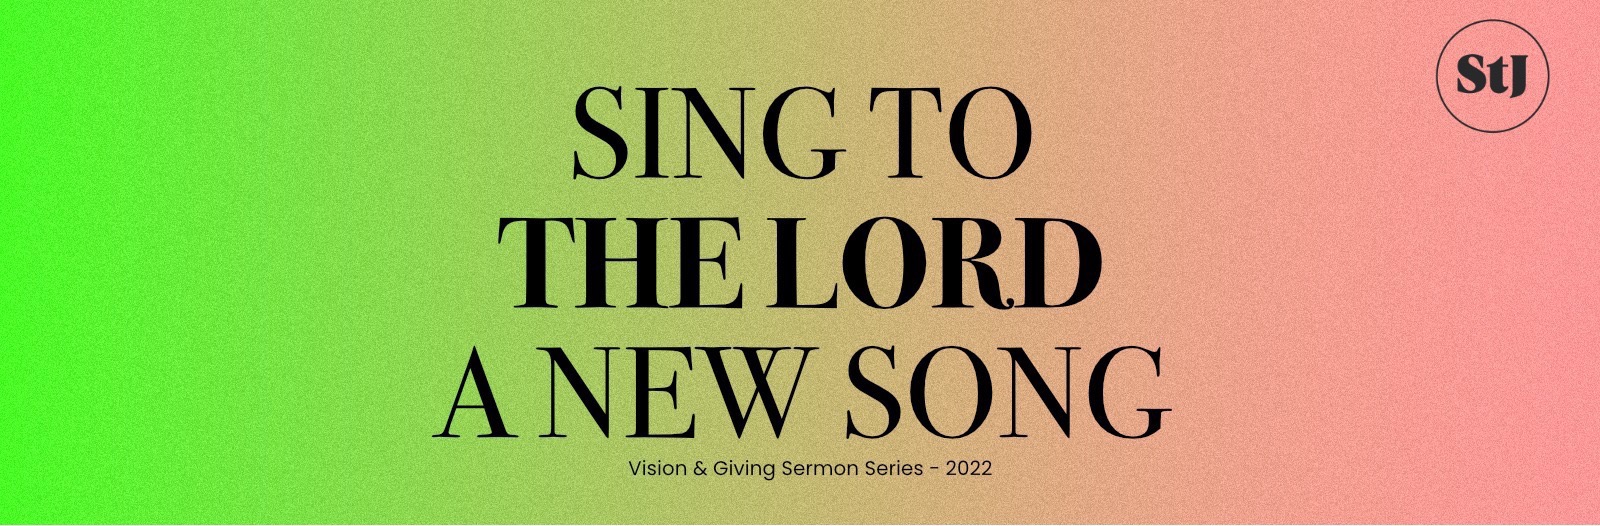 Sing to the Lord a New Song 